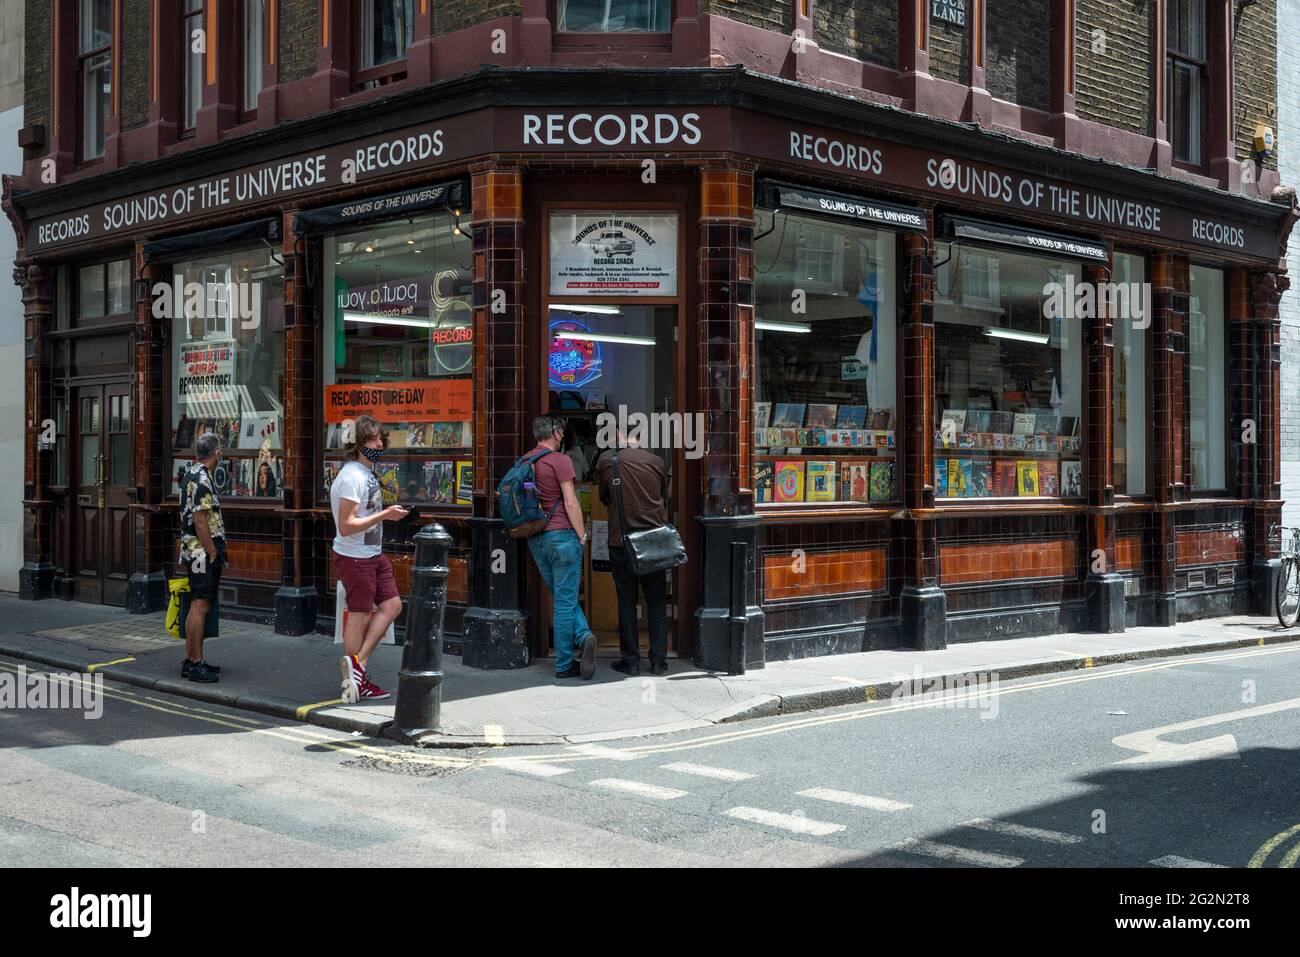 London Uk 12 June 21 Customers Outside Sounds Of The Universe Records In Soho On Record Store Day Where Independent Record Shops Worldwide Celebrate Music Including Special Vinyl Releases Made Exclusively For